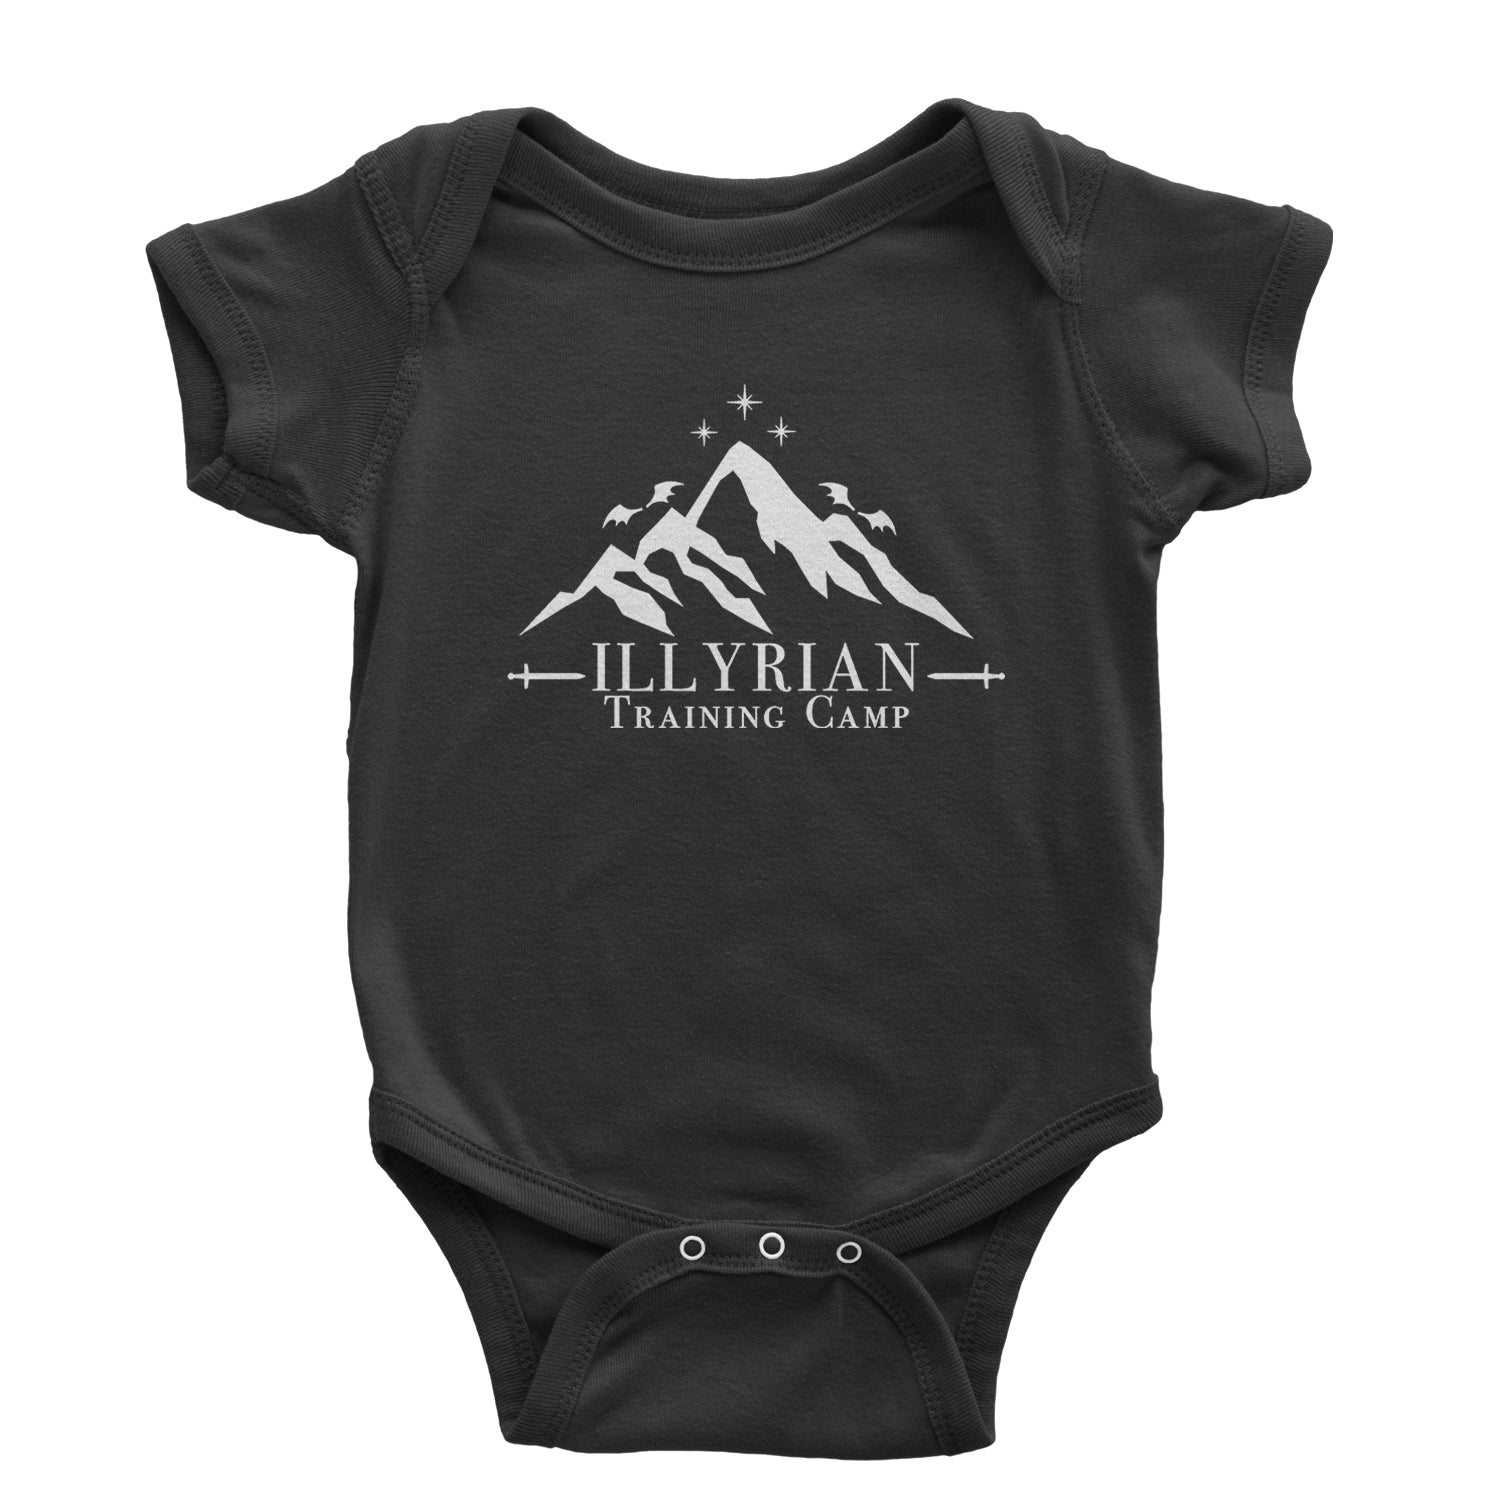 Illyrian Training Camp Night Court Infant One-Piece Romper Bodysuit and Toddler T-shirt